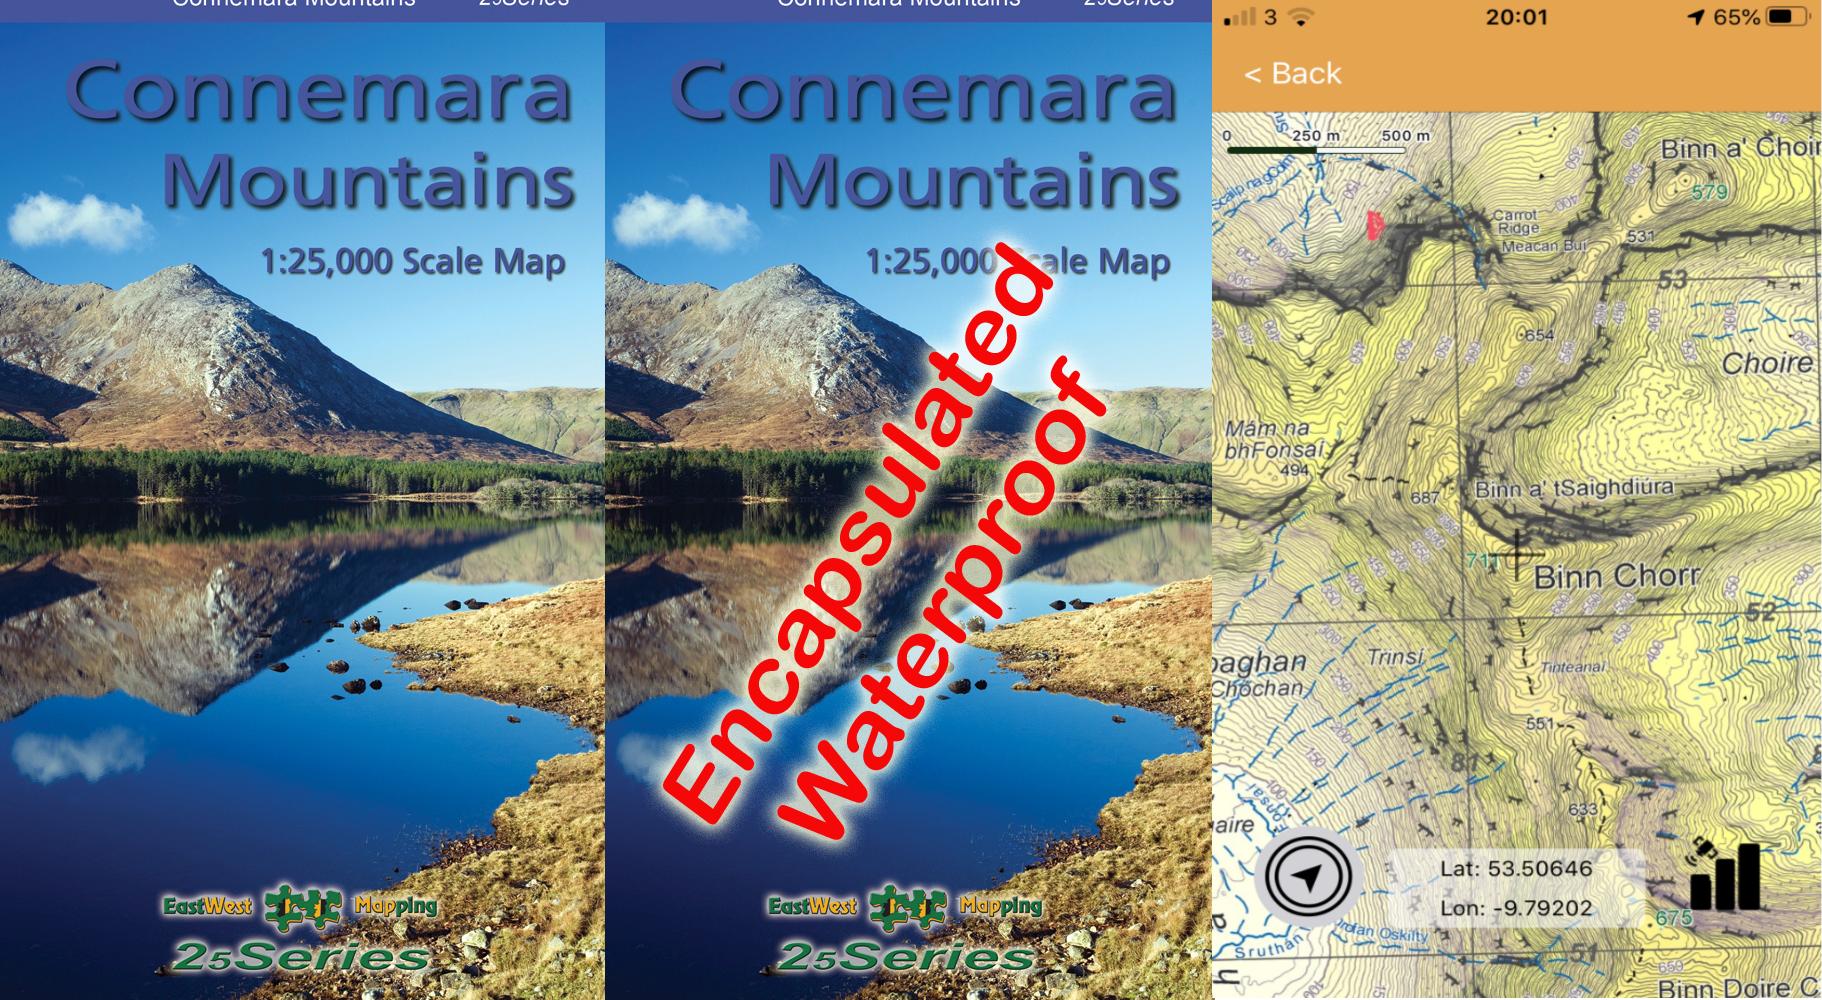 A set of maps of the Connemara Mountains published by East West Mapping.